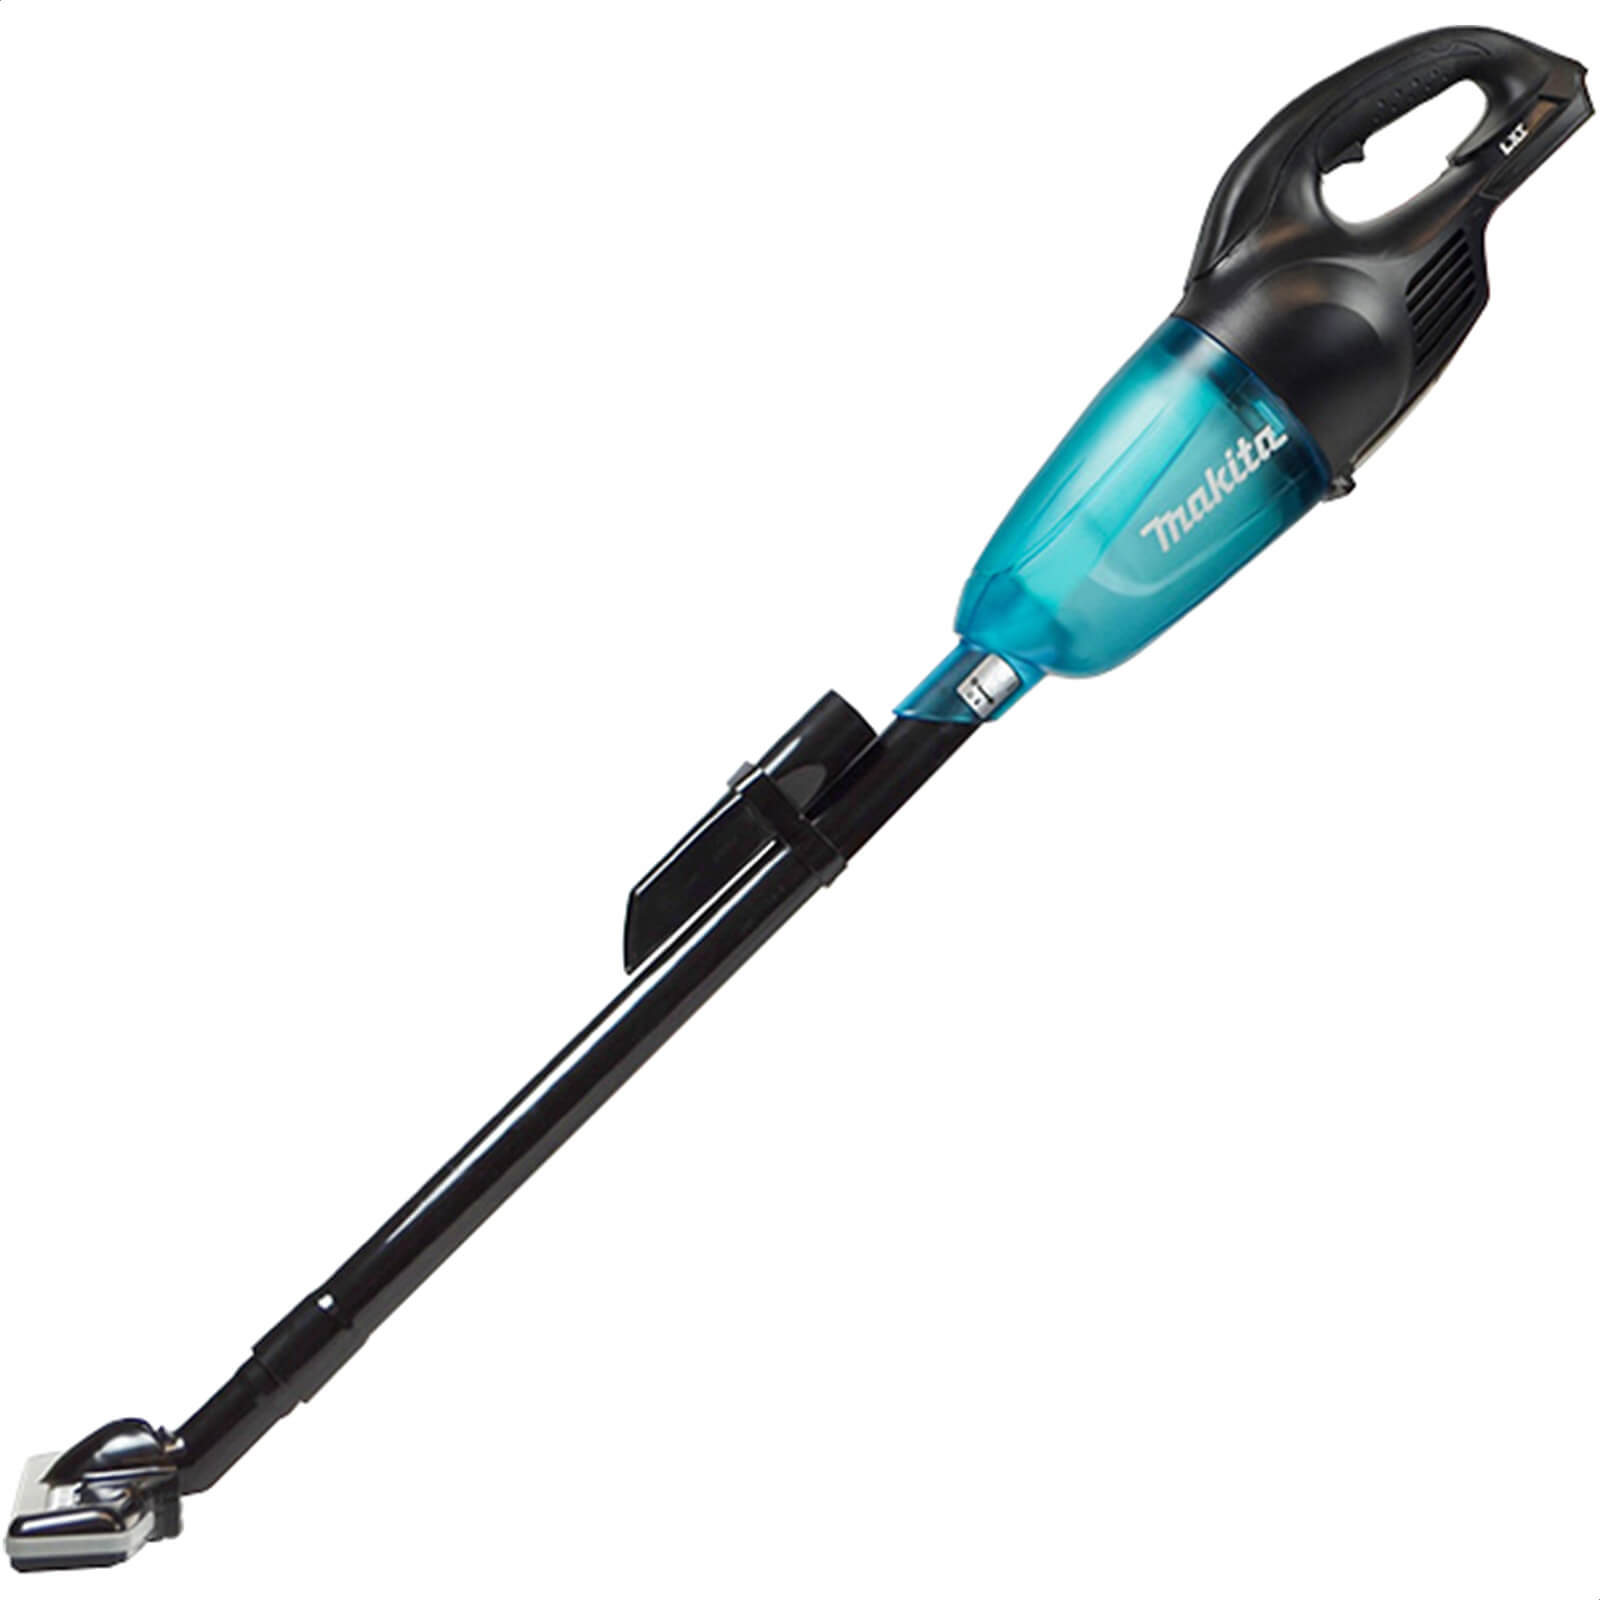 Image of Makita DCL180 18v LXT Cordless Vacuum Cleaner Black No Batteries No Charger No Case